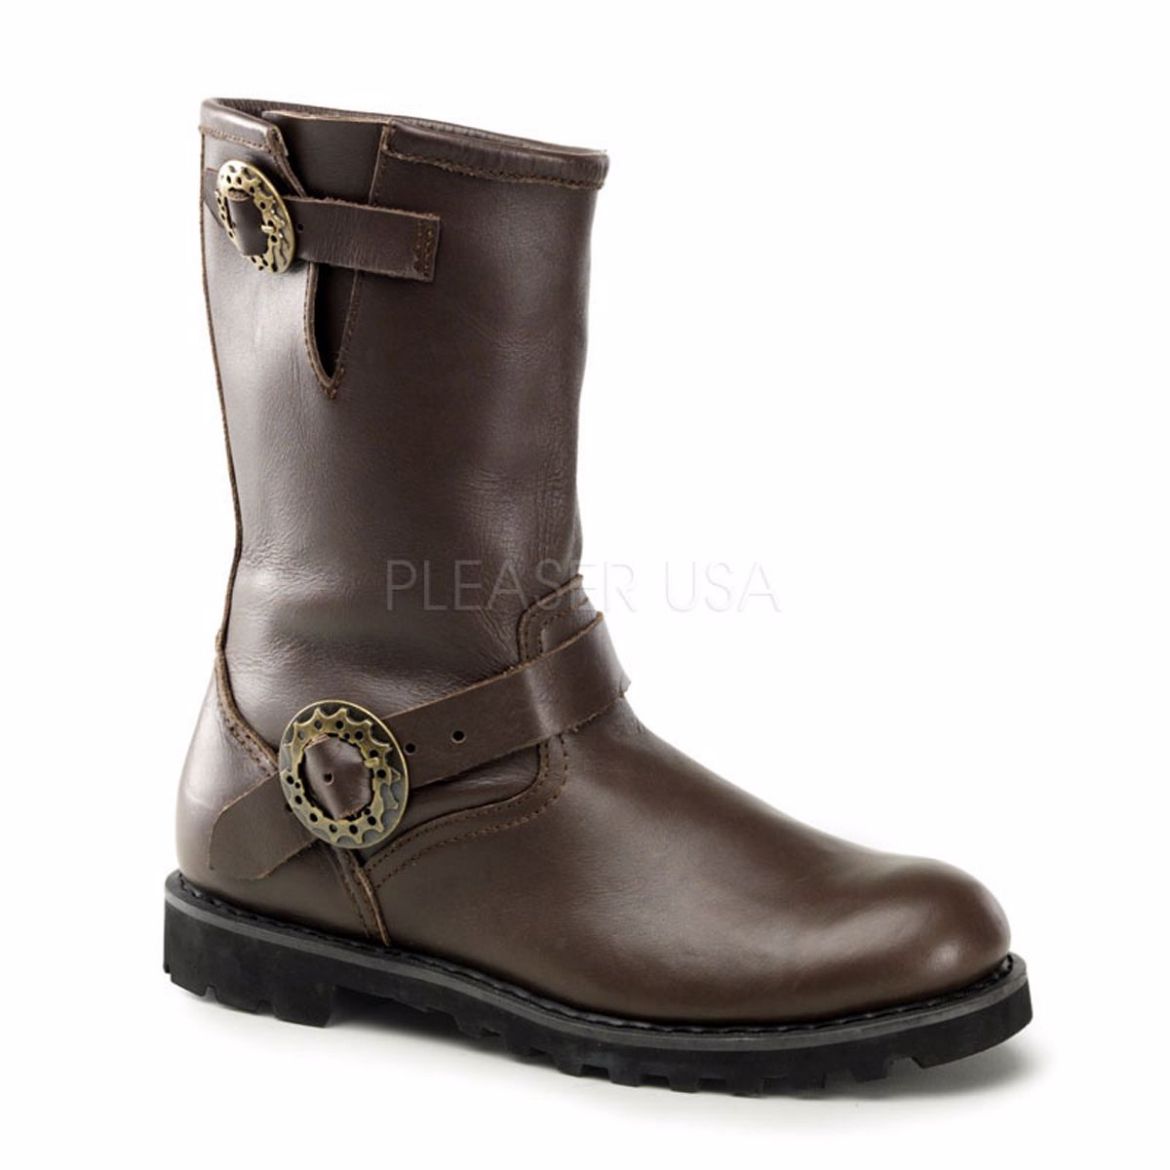 Product image of Demonia Steam Brown Leather, 1 1/4 inch (3.2 cm) Heel Knee High Boot